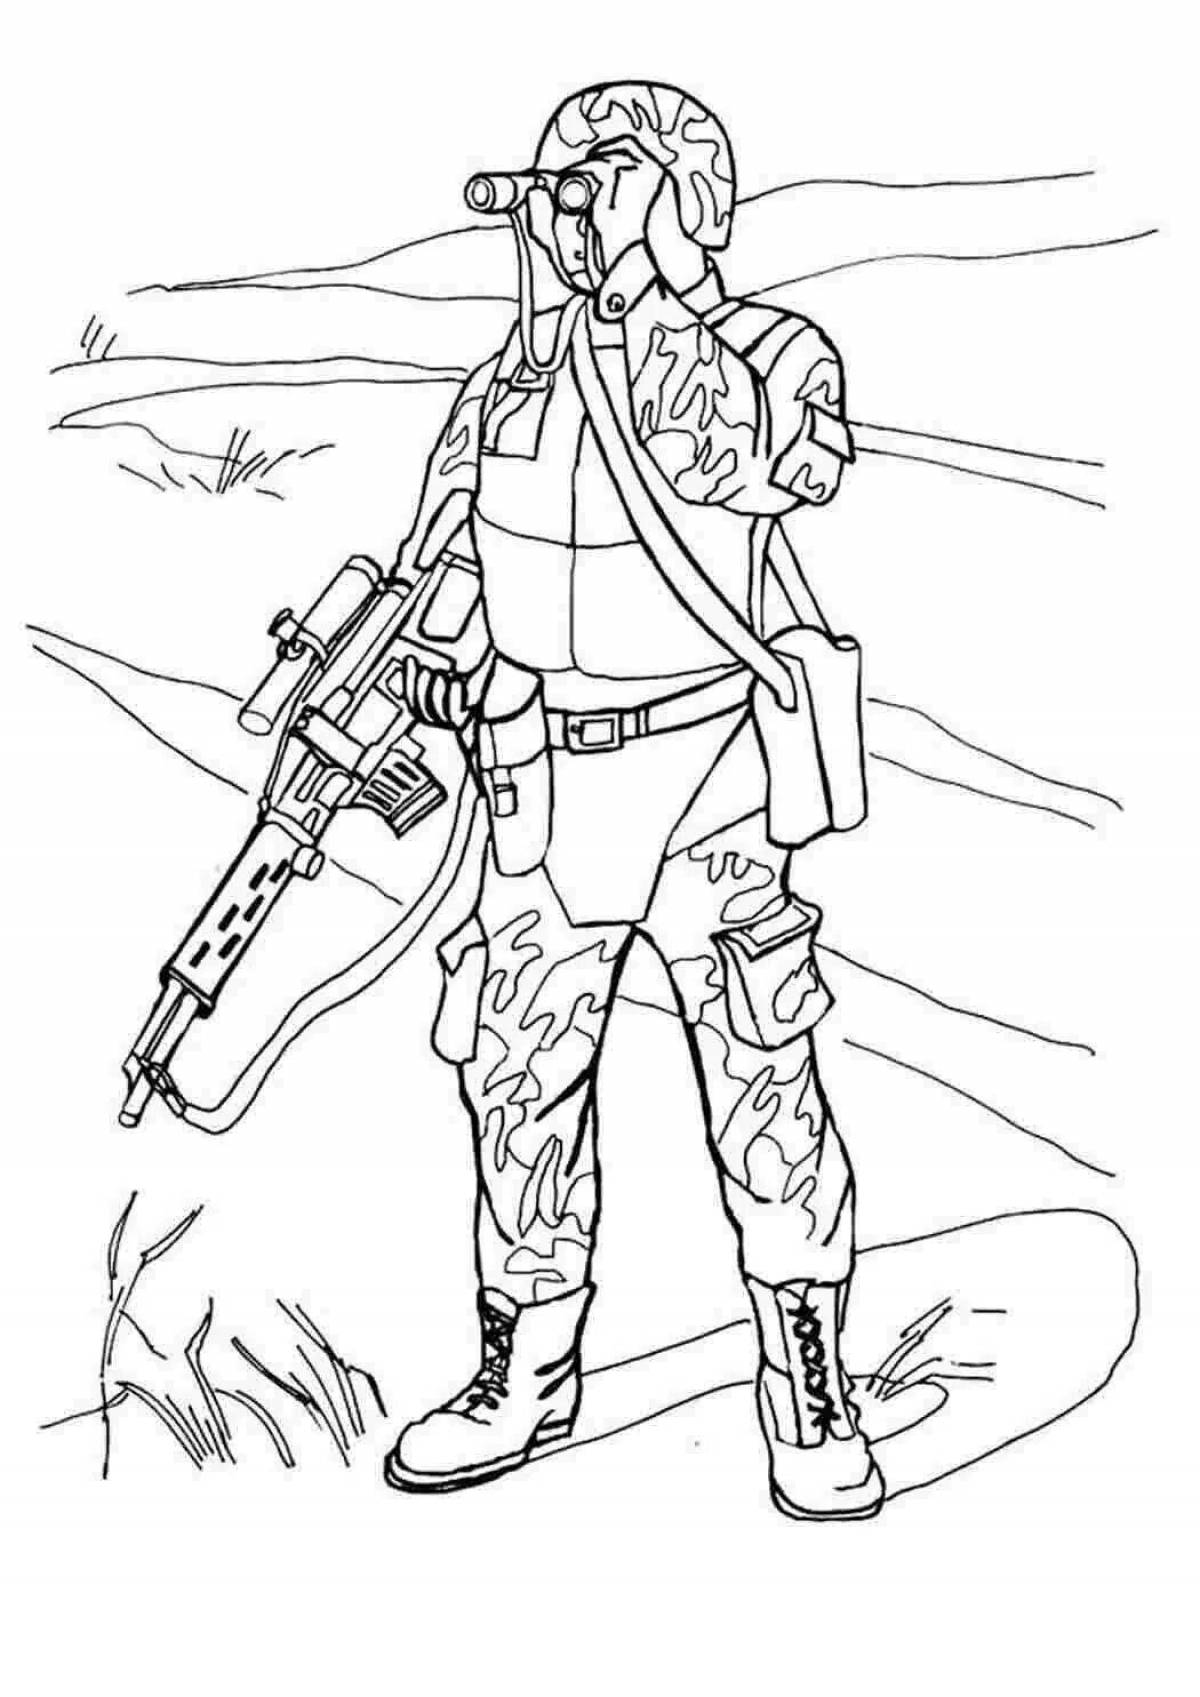 Commando coloring page - unchanged